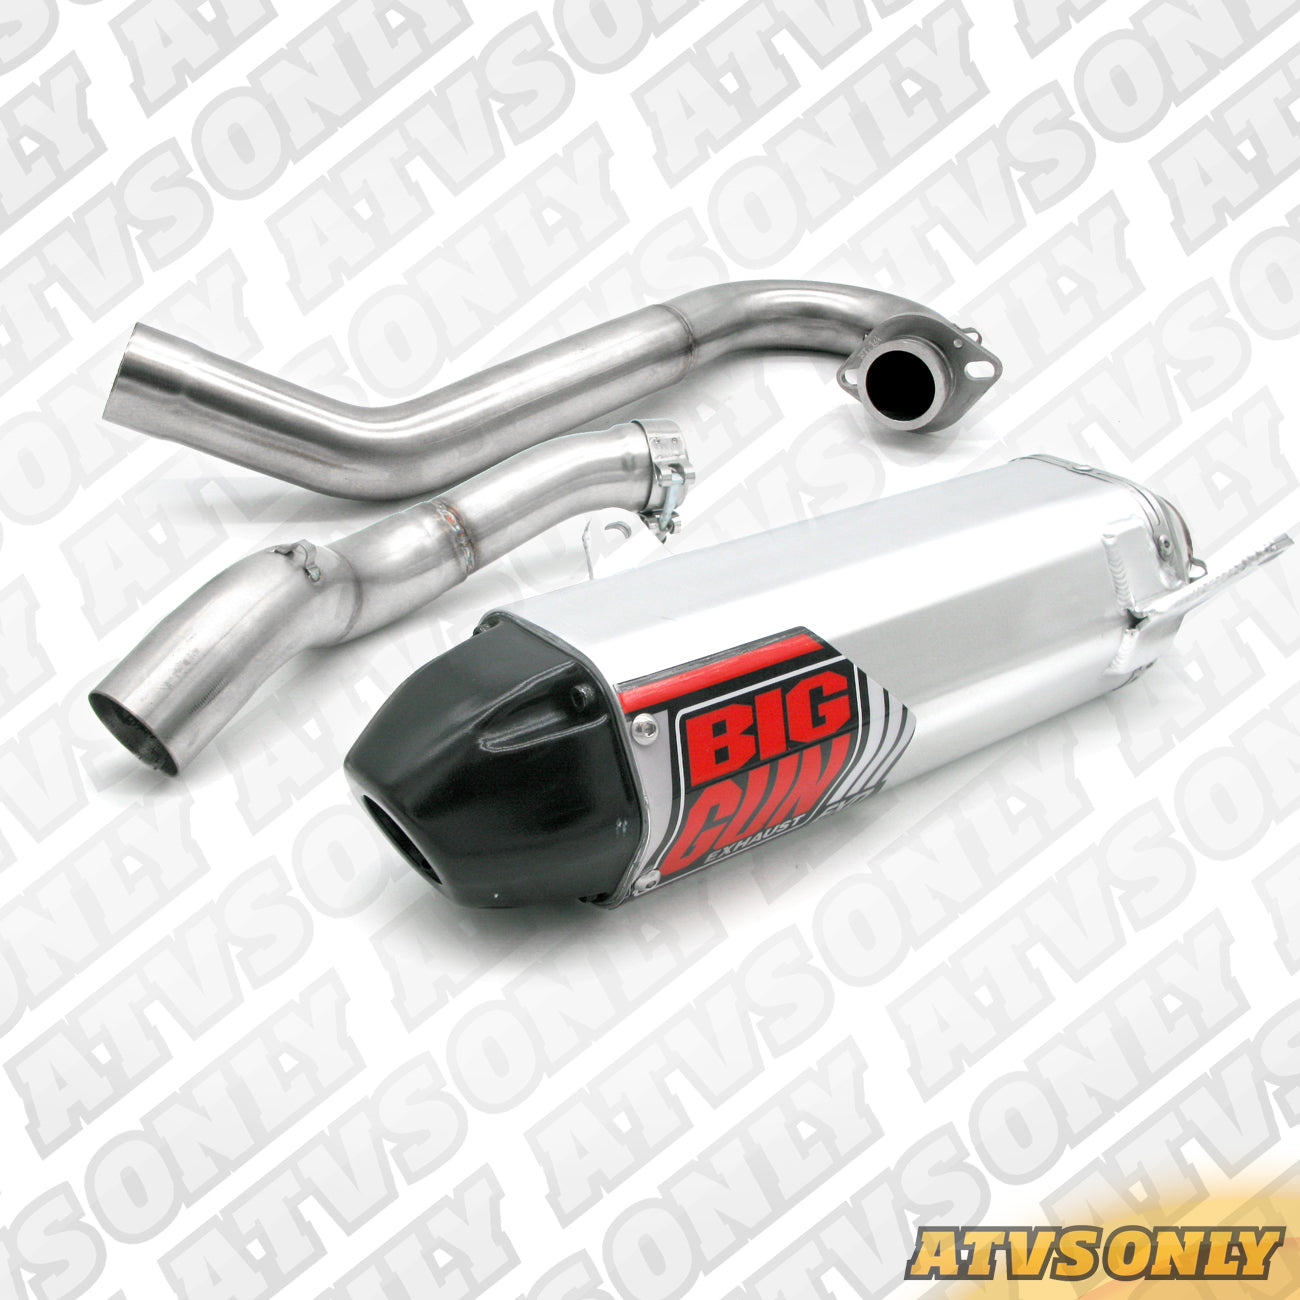 Exhaust – EXO Full Exhaust System for Polaris Outlaw 450 525